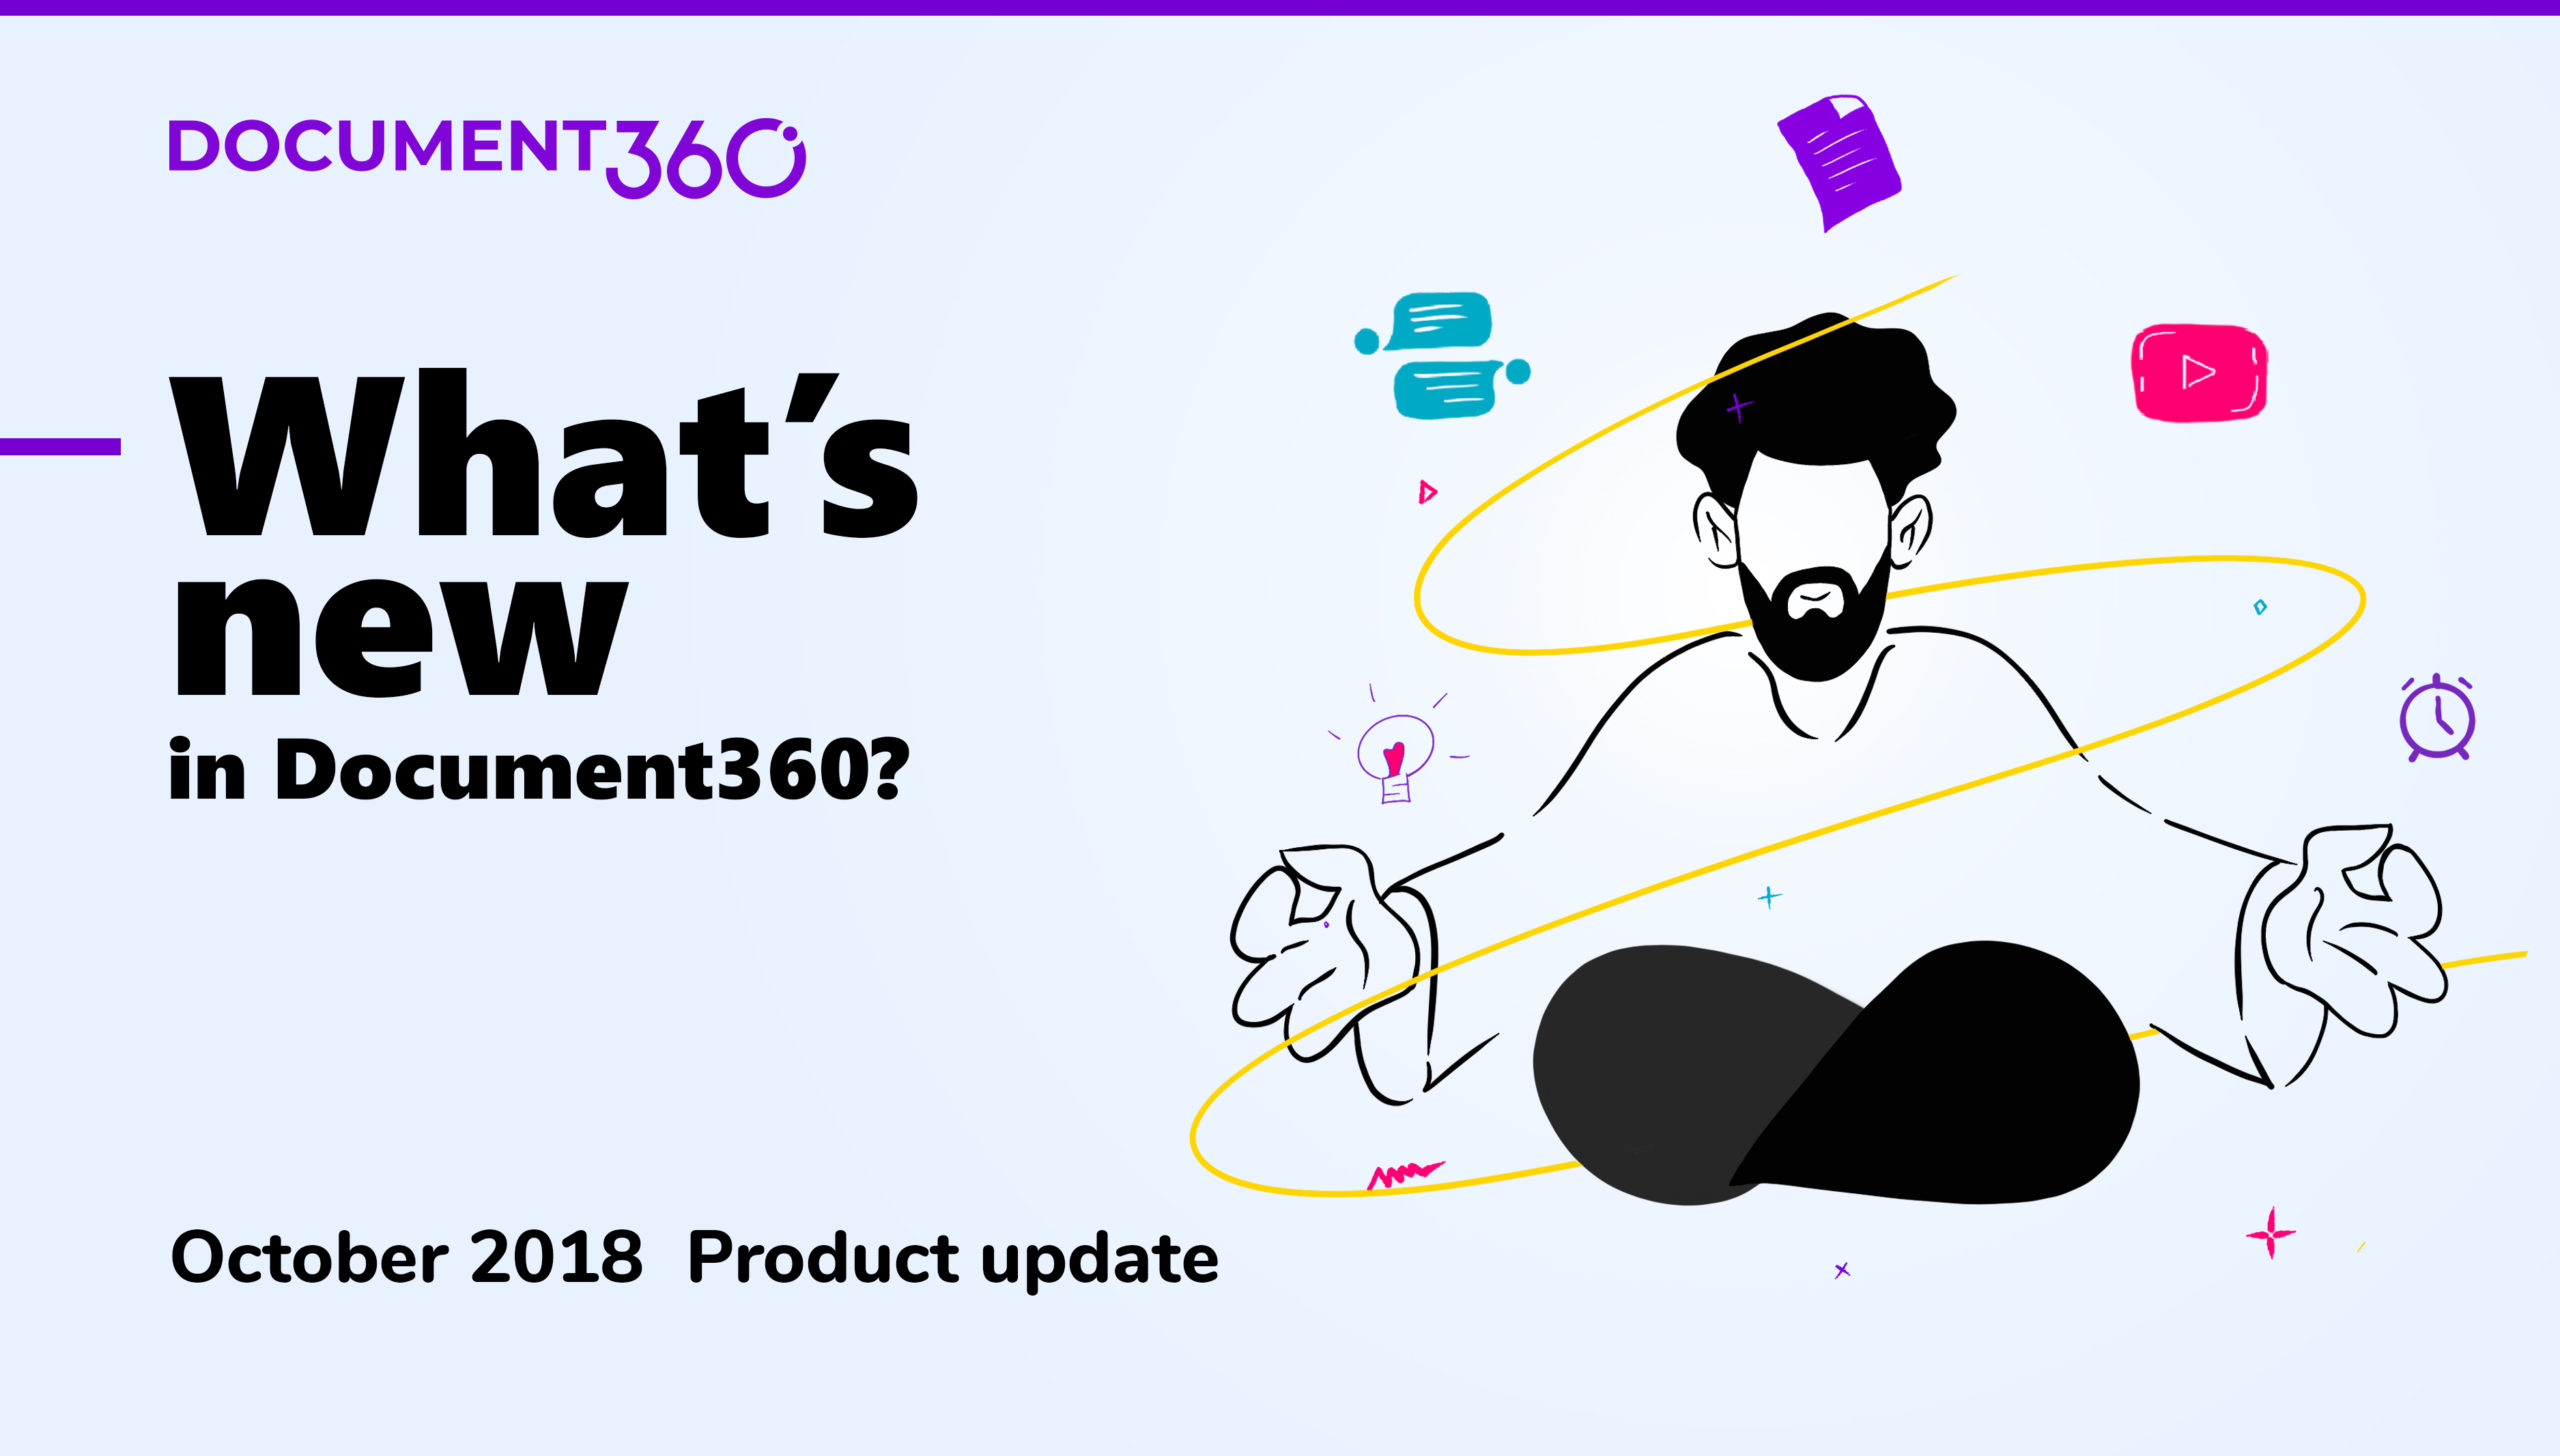 October Product update - Document360